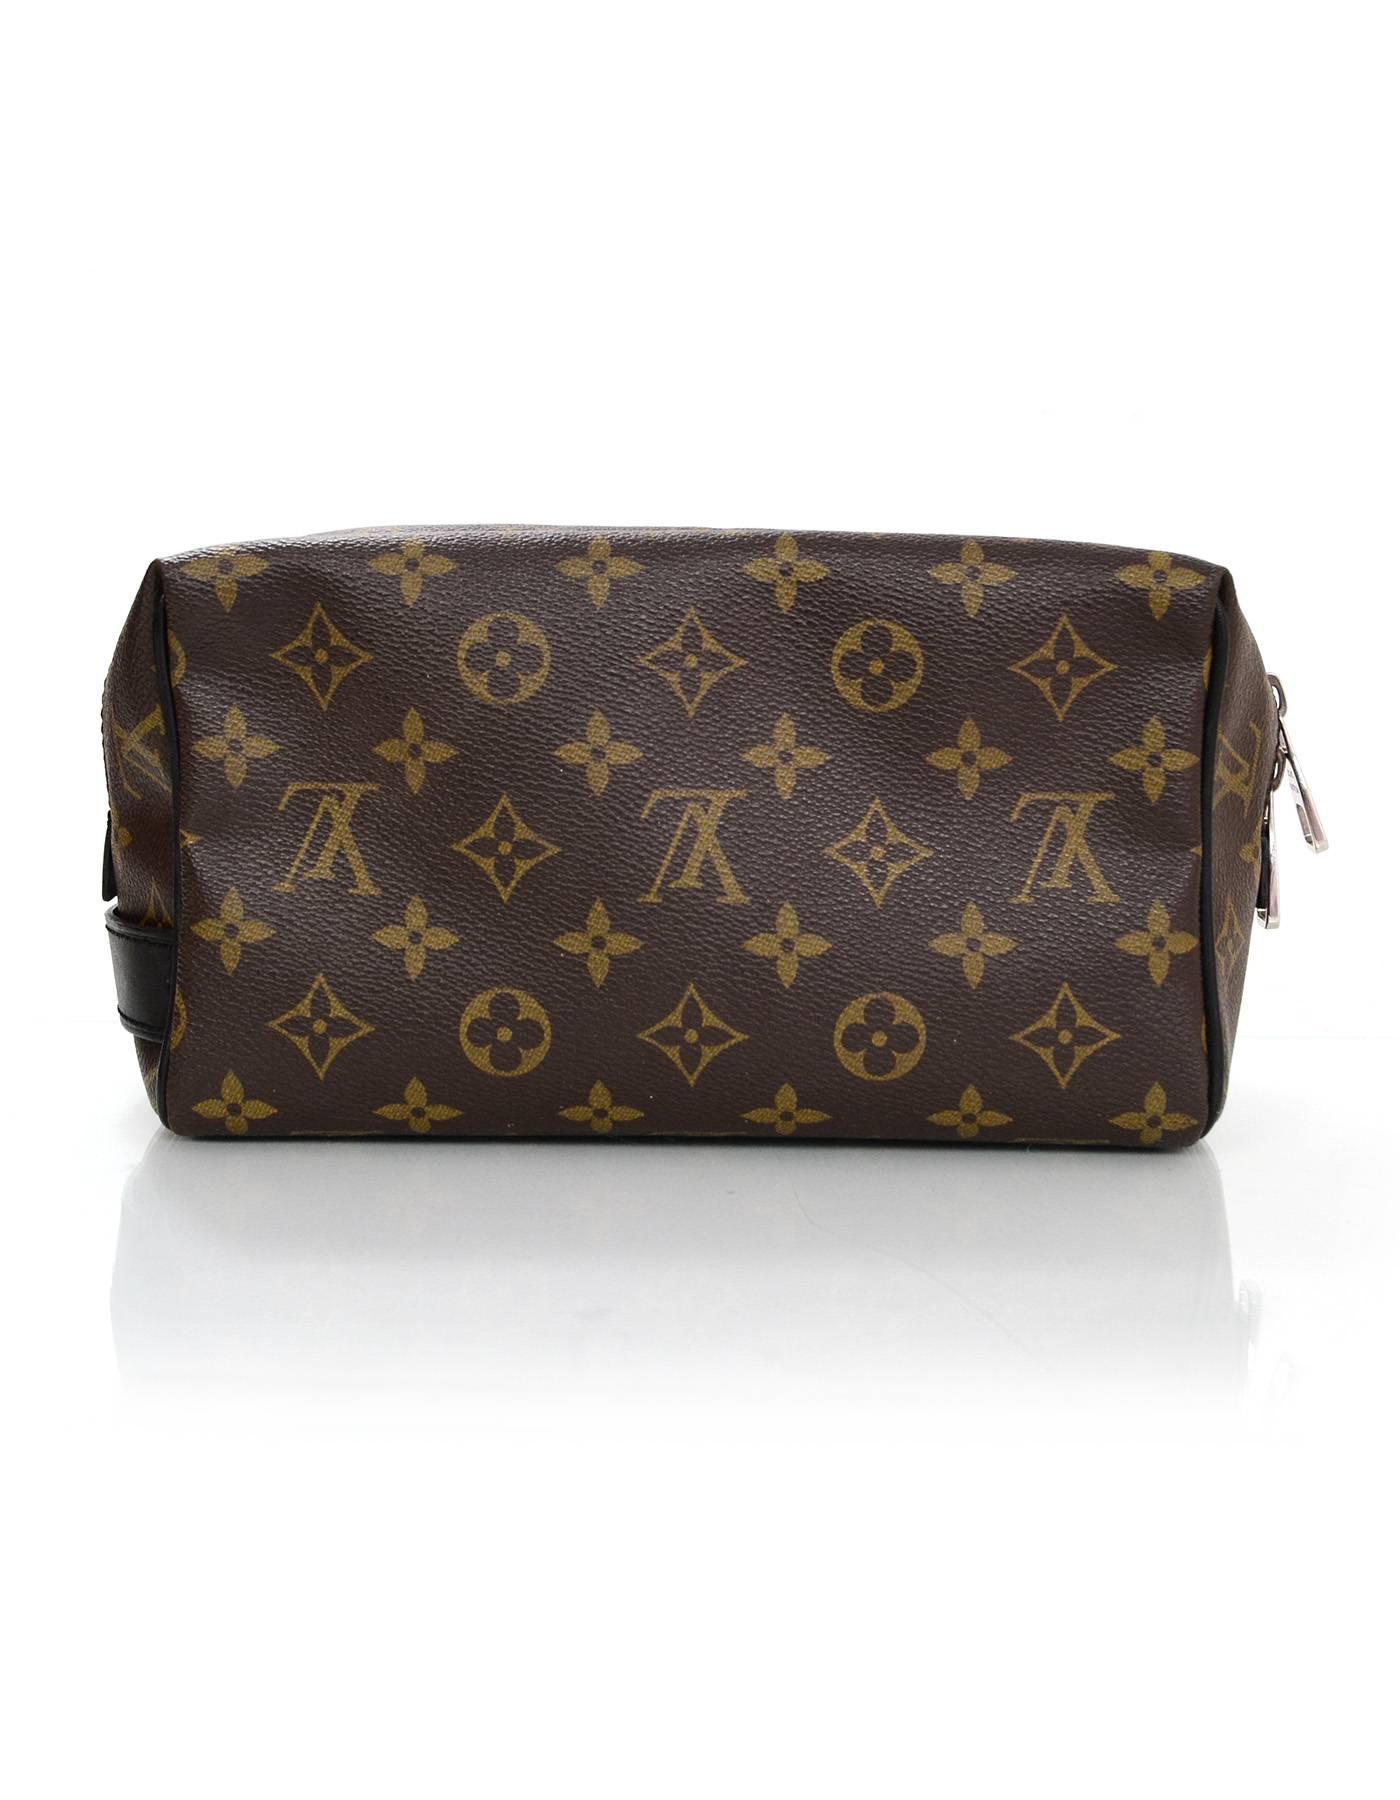 Louis Vuitton Monogram Macassar Toiletry Kit

Made In: France
Year of Production: 2013
Color: Brown, pink
Hardware: Silvertone
Materials: Coated canvas, leather
Serial Number/Date Code: BA4113
Lining: Burgundy leather
Closure/Opening: Zip